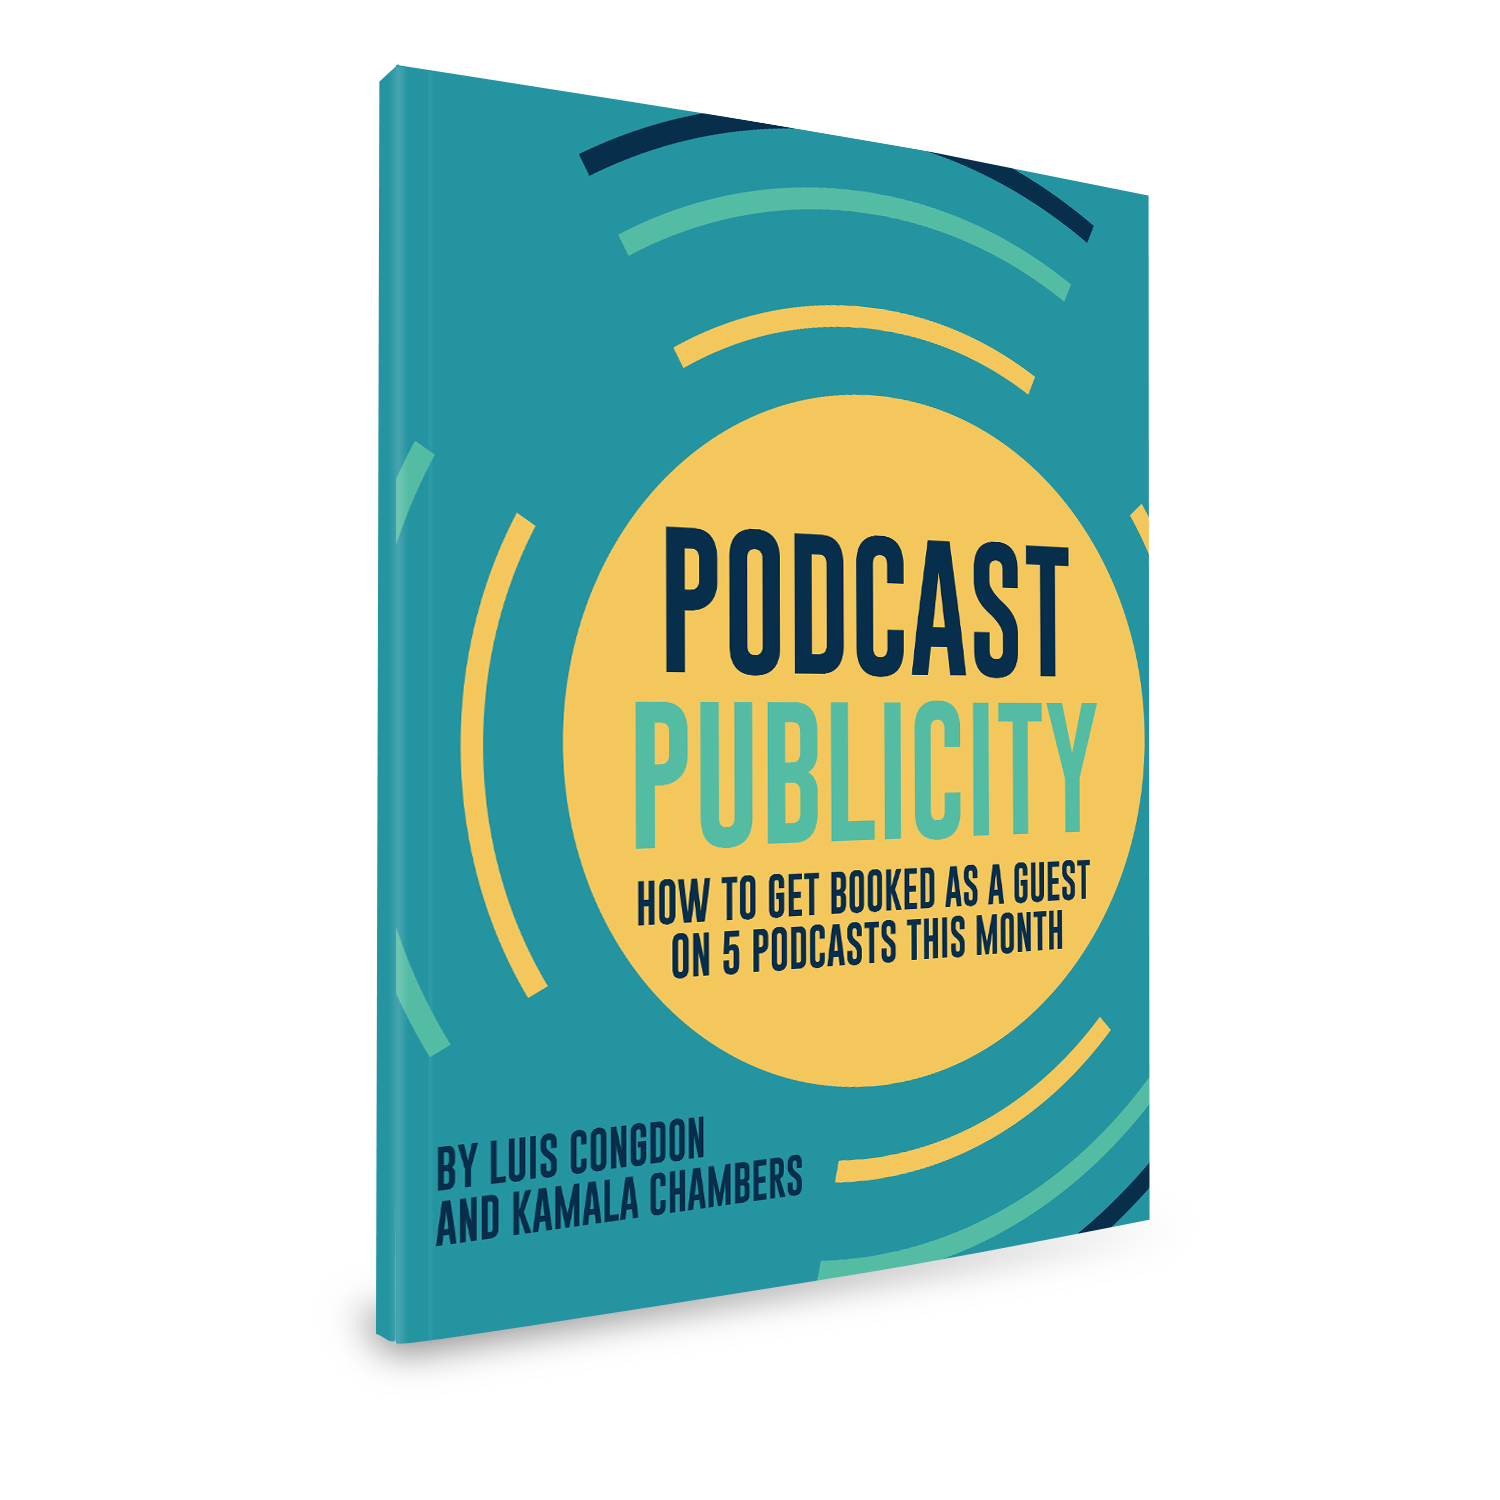 The Ultimate Podcast Guidebook Bundle